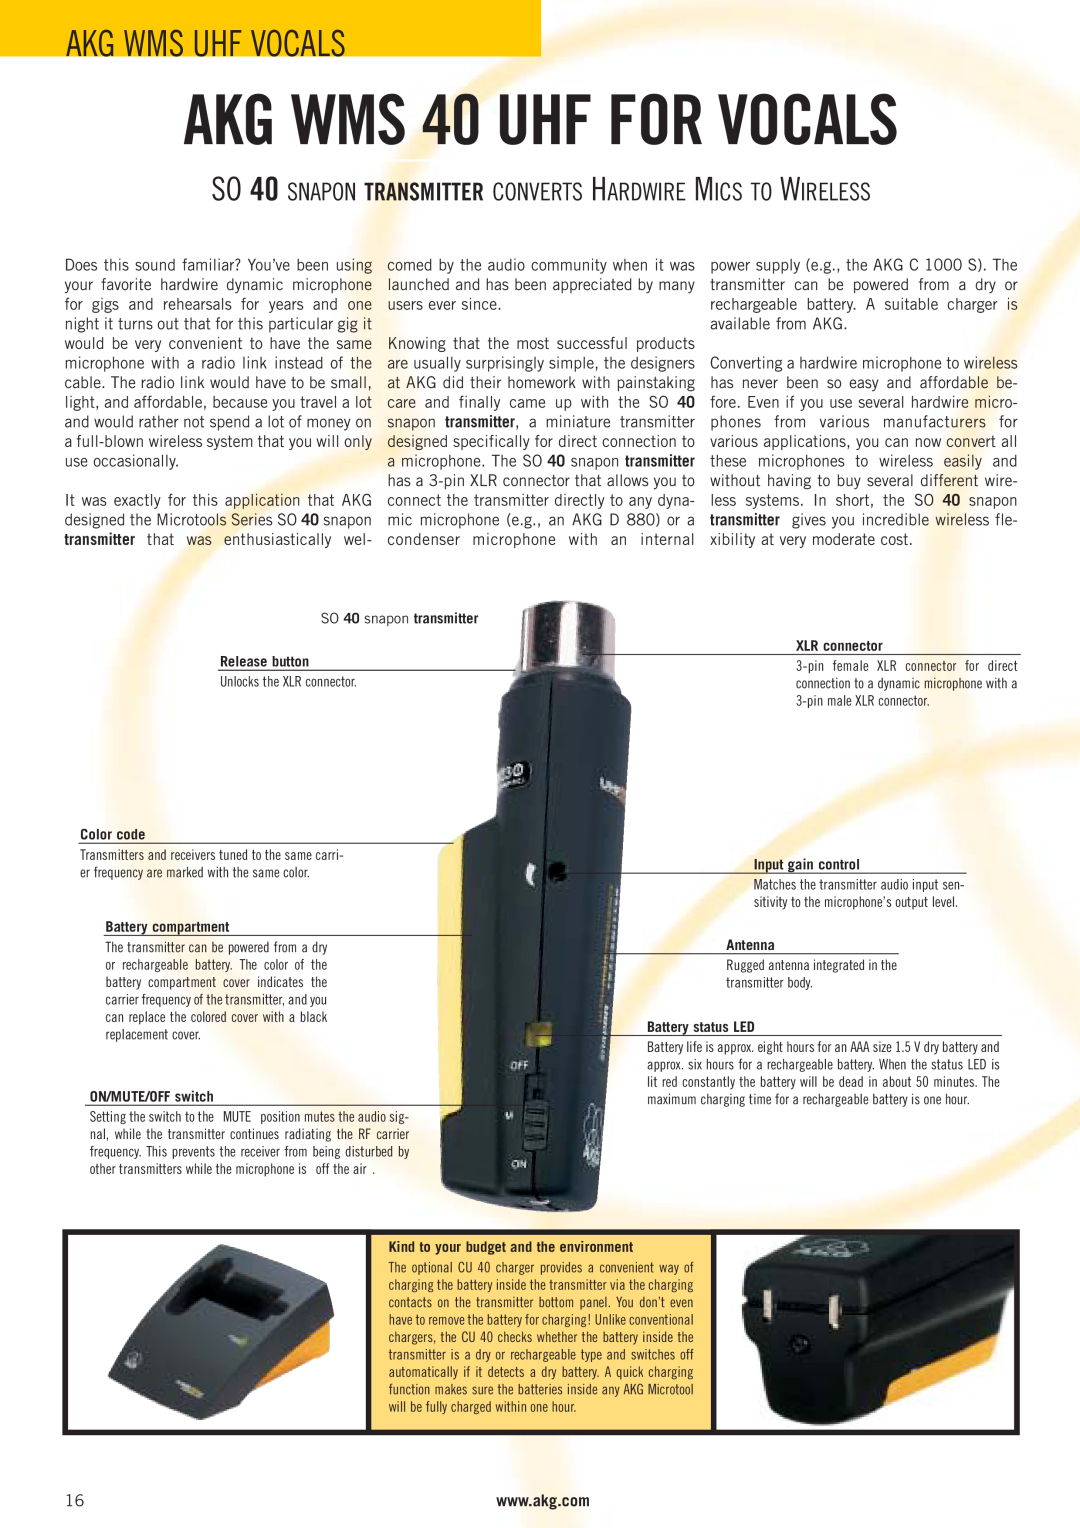 AKG Acoustics WMS 4000 manual SO 40 SNAPON TRANSMITTER CONVERTS HARDWIRE MICS TO WIRELESS, AKG WMS 40 UHF FOR VOCALS 